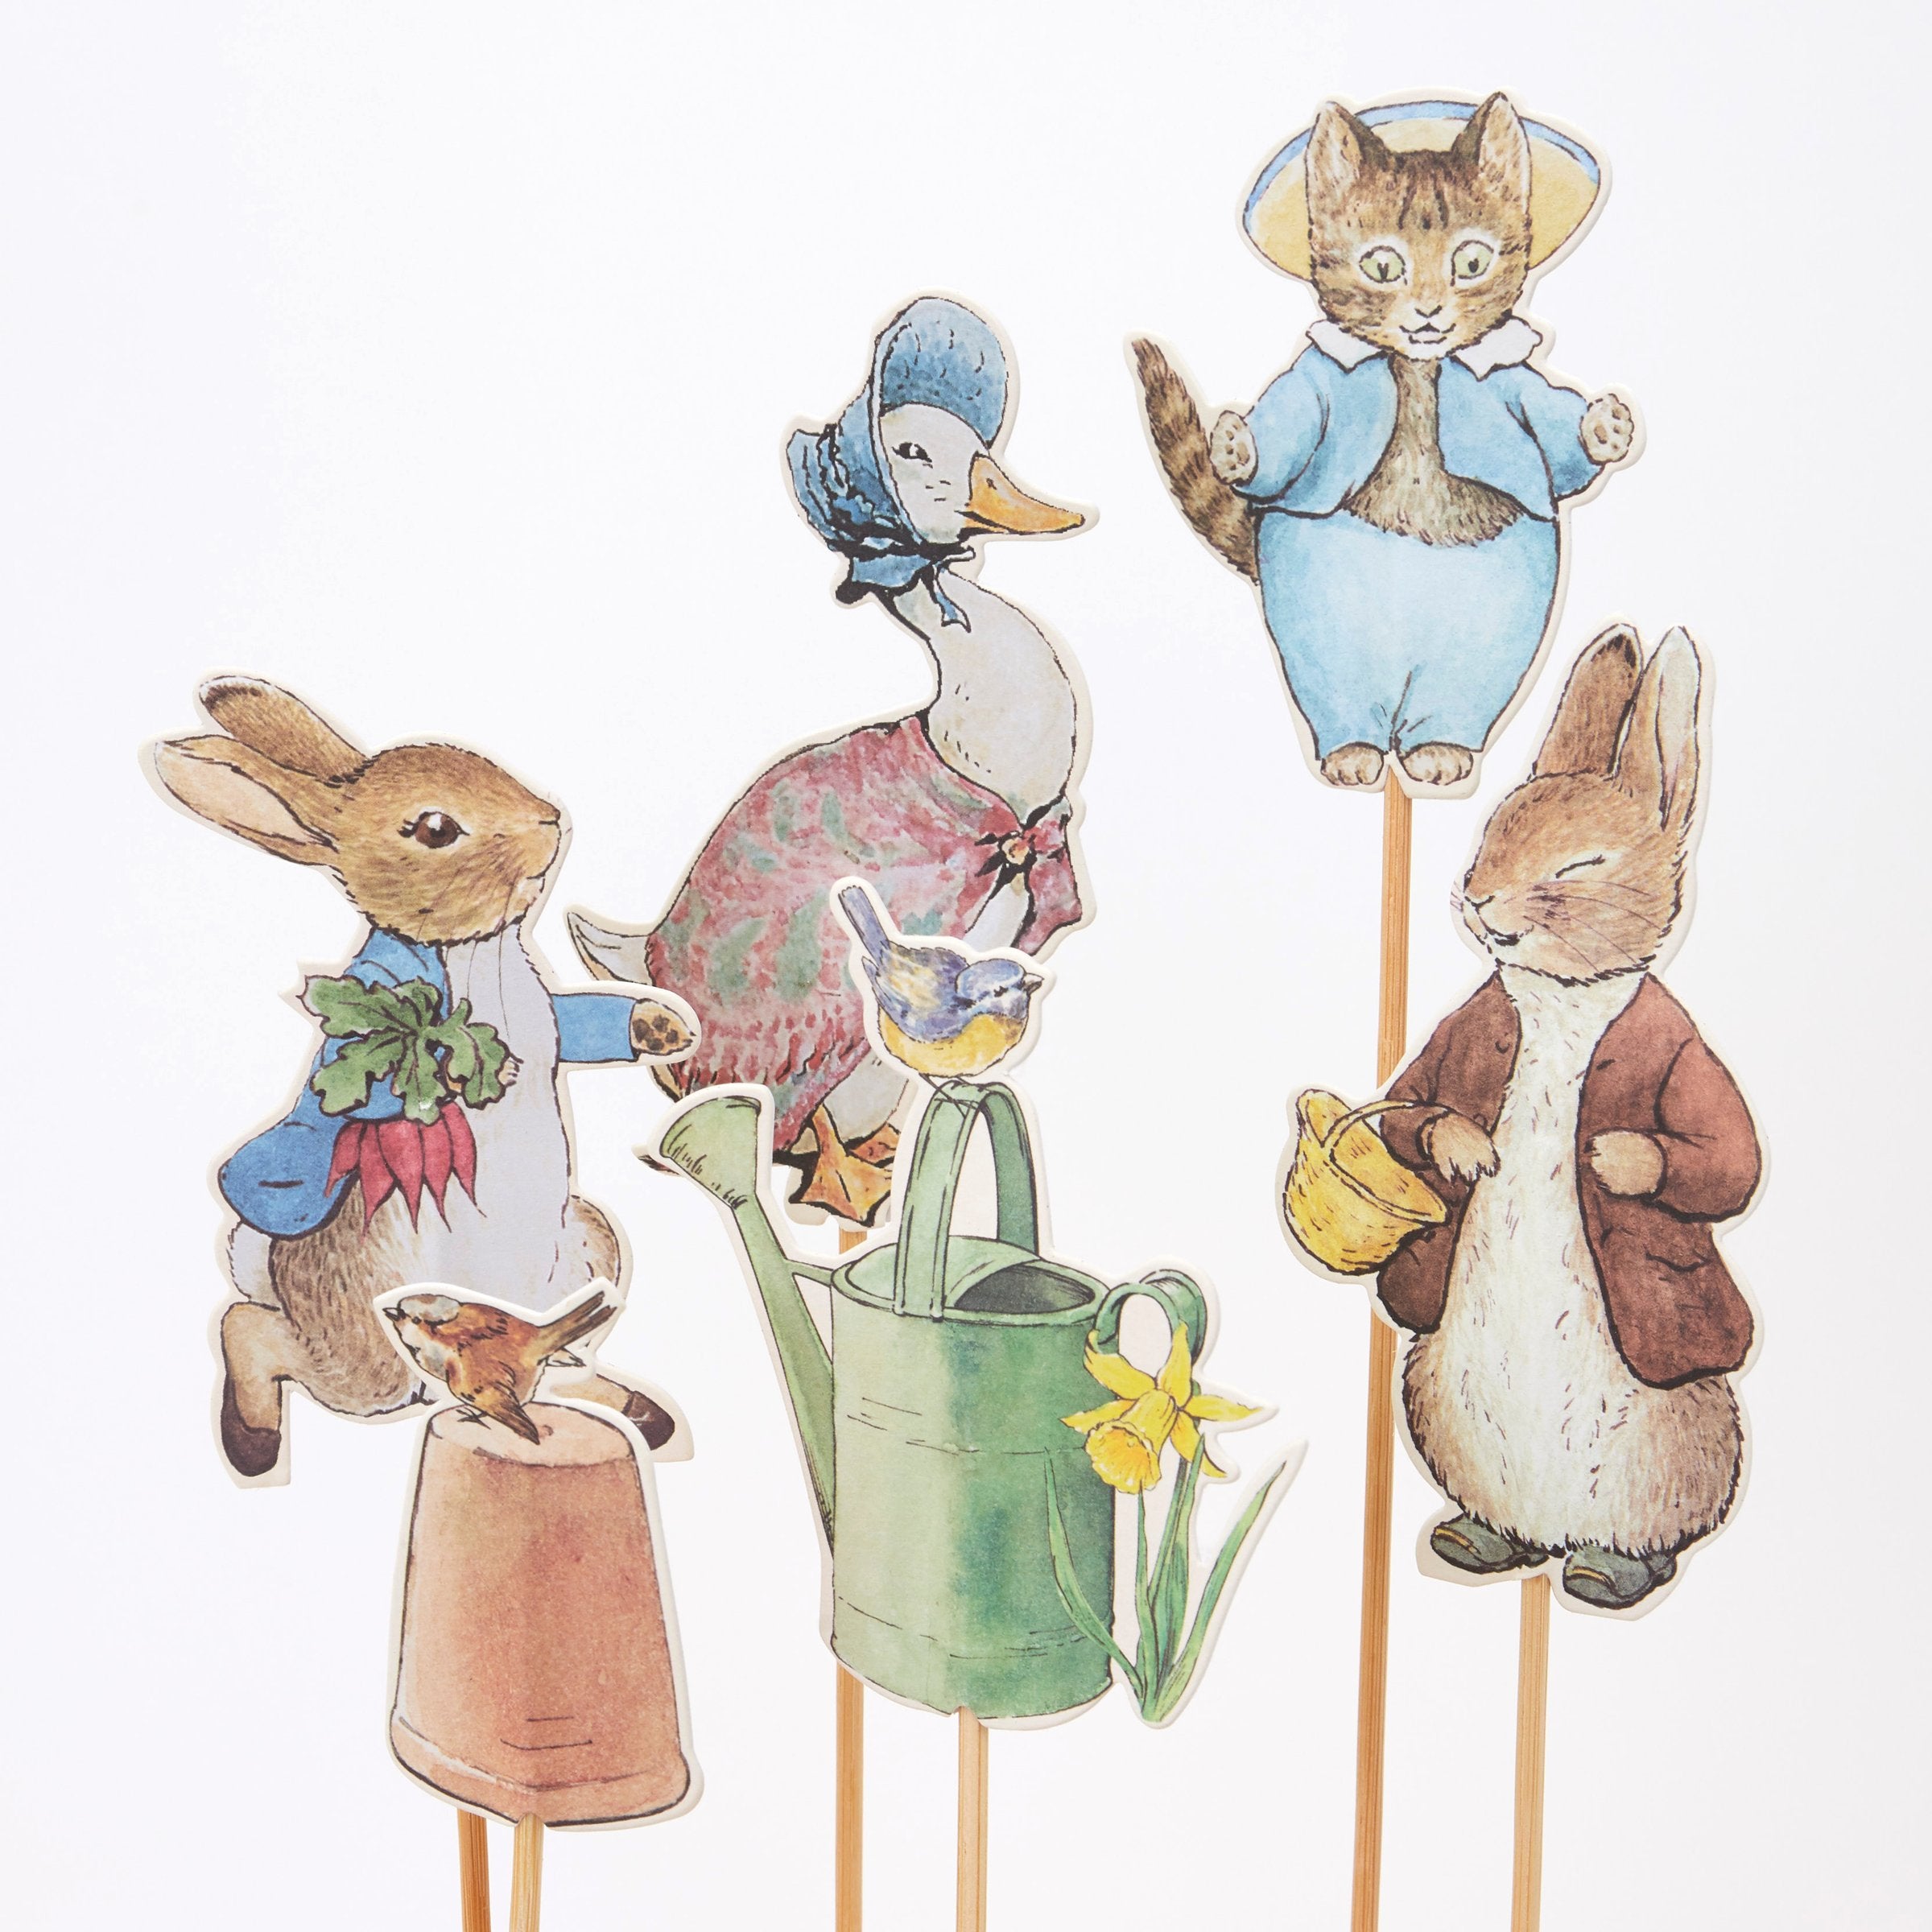 The set has 6 designs, including Peter Rabbit, Tom Kitten, Jemima Puddle-duck, Benjamin Bunny, a watering can, and a  bird.